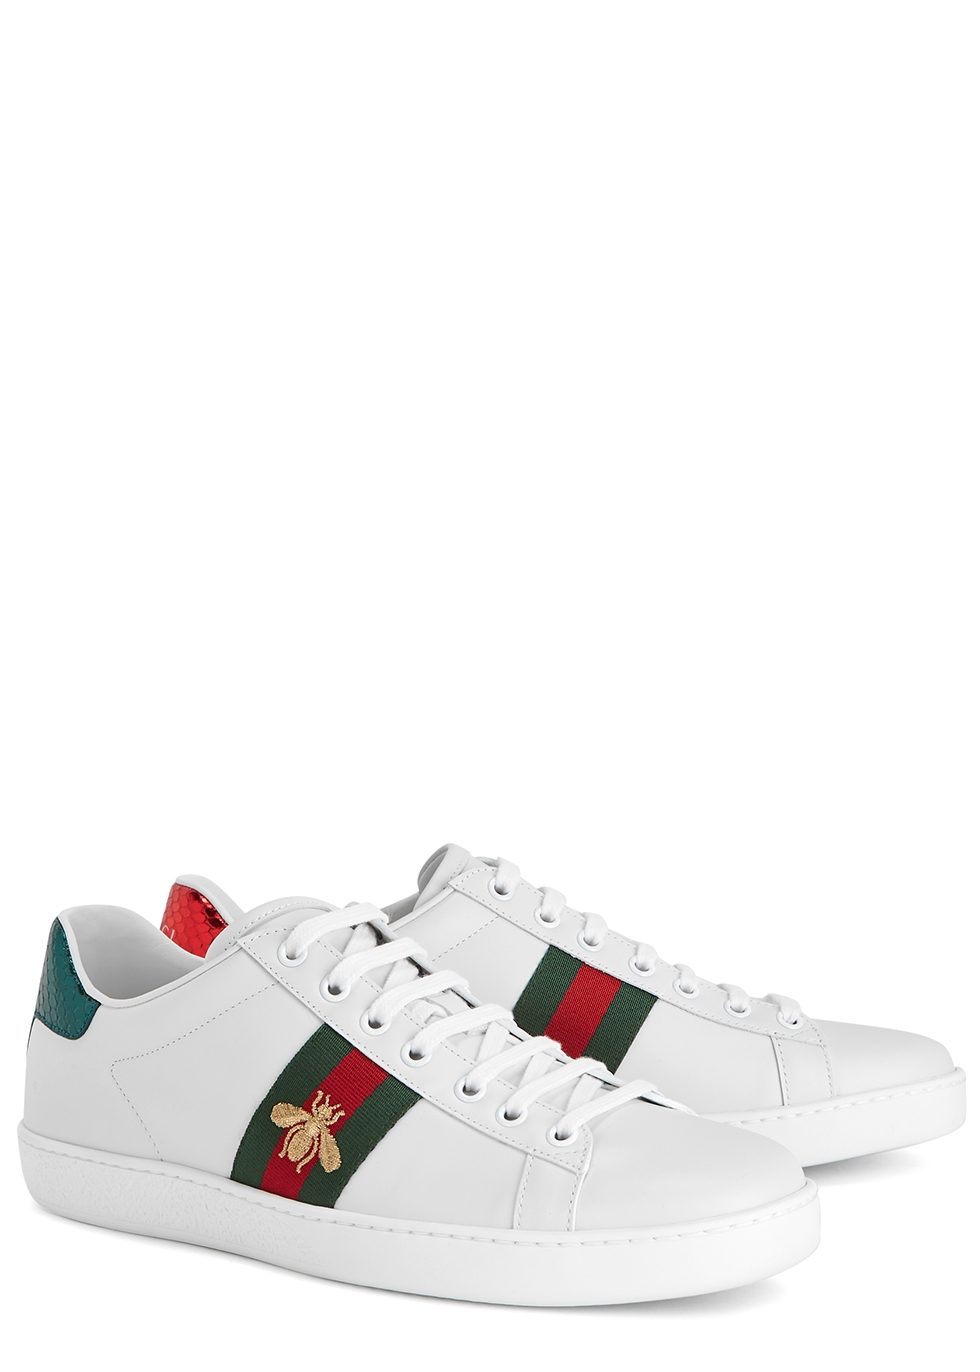 eating gucci shoes